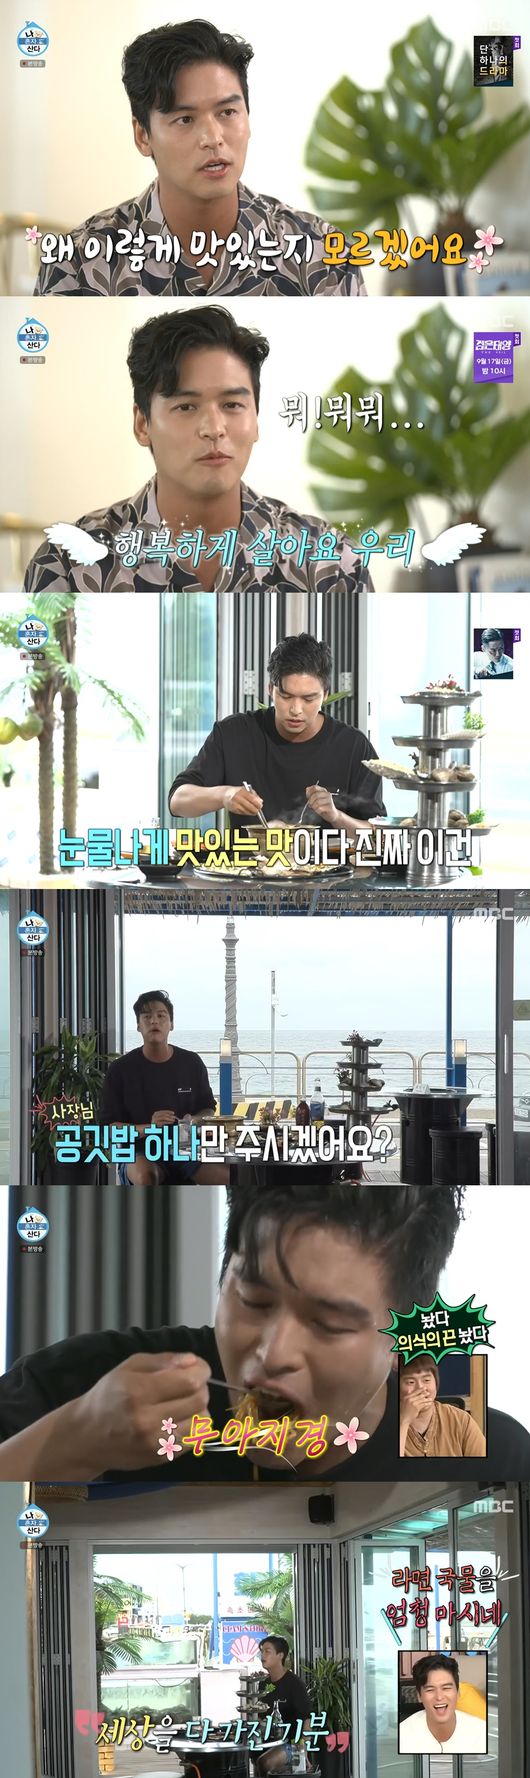 Lee Jang-woo has a Cheating Day after a successful dietIn MBC I Live Alone broadcast on the 3rd, Lee Jang-woo was shown to have a cheering day after the diet success.Lee Jang-woo said, I declared that I would diet for 100 days, so I thought I would die if I did not, he said. When I started dieting, it was 98kg and 31 ~ 32% body fat.Its 73kg, minus 25kg now, he said.Lee Jang-woo said he would take out the body fat rate by 10%, but it failed and took it by 16%.Lee Jang-woo laughed at taking a self-body profile photo in commemoration of the success of the diet.Lee Jang-woo had a Cheating Day after a long time, Lee Jang-woo said, On the last 30 days, I had almost no Cheating Day.Junho said, I ate a lot of shrimp cookies after the diet, and I think I ate 10 bags at once because I wanted to eat salty.Lee Jang-woo ordered beer and bokbunjaju at the shell roast house; Lee Jang-woo took the aroma of the beer and shot one straight away.Lee Jang-woo said, When I gulped over my mouth, I felt the refreshing feeling of wheat. Lee Jang-woo then started eating a four-speed shell roast.Lee Jang-woo admired after eating conchizLee Jang-woo was hooked on scallops; Junho said, I feel really arrogant when I eat after I eat.Lee Jang-woo couldnt hide his smile when he saw Instant NoodleLee Jang-woo said, Who invented the Instant Noodle? Instant Noodle is really so delicious.I can not compare the taste of eating after a month. Eat it, everyone. Live happily. Lee Jang-woo ate the instant noodle and ordered air rice and ate rice.Kian84, who saw this, laughed, saying, Jangwoo is likely to return soon. Lee Jang-woo continued the storm as if he had put a string of consciousness.Junho said, I am wrong about Cheating Day. It is Cheating Day to eat a lot of diet. Park Na-rae laughed, saying, I feel uncomfortable with Junho One.Lee Jang-woo said, I felt that I could not lose weight this time. I could change everything in 100 days.It was 100 days long, he said. 100 days ago, I was positive and bright, but more positive and bright.I was grateful and delighted that the Han River was so small that I was happy to be in Seoul. 